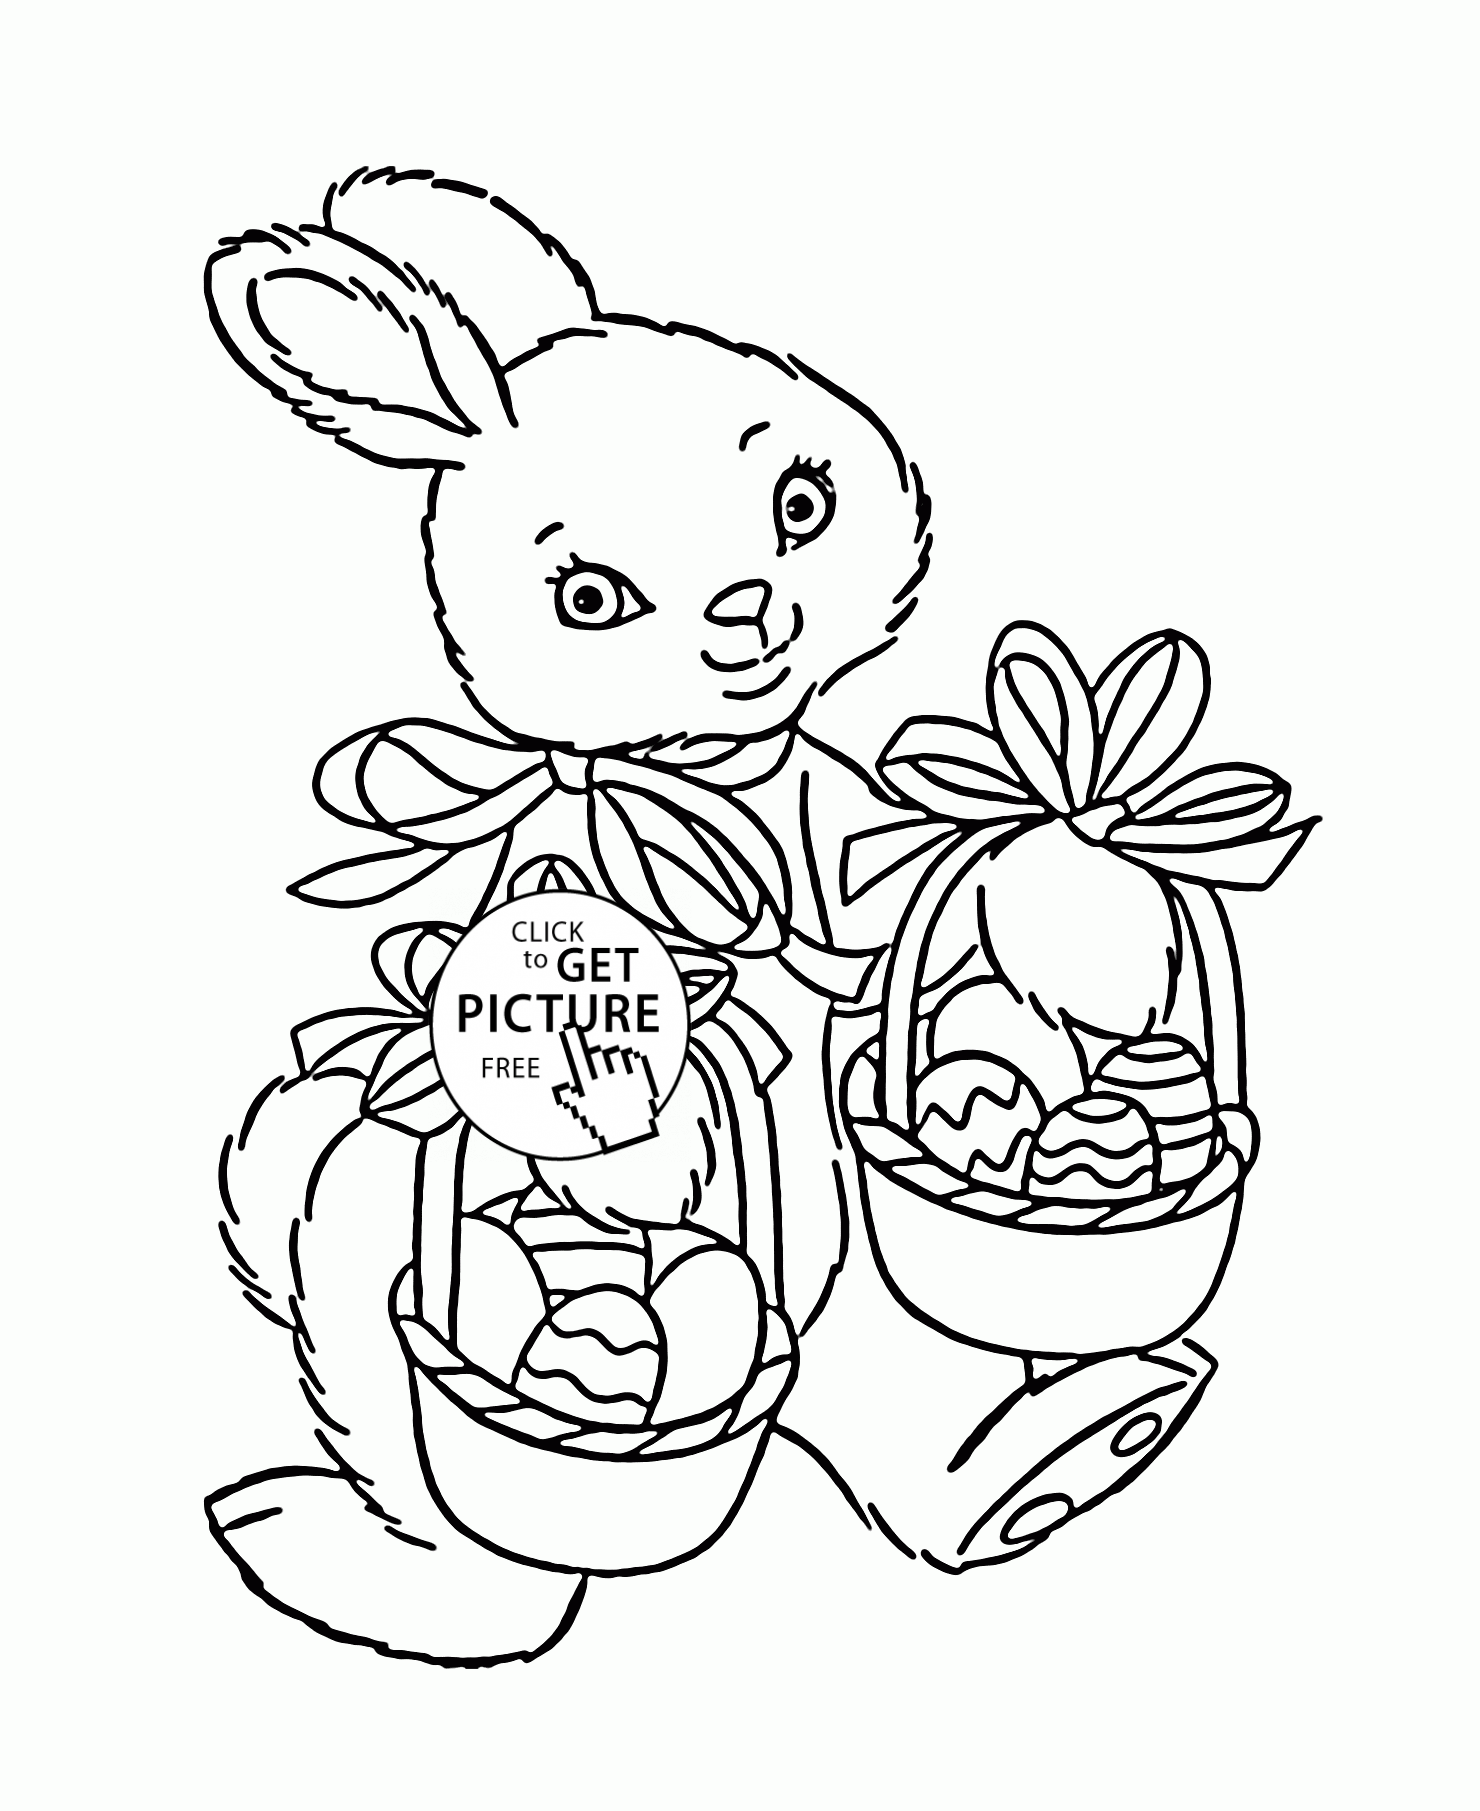 Cute Bunny Coloring Pages To Print - Coloring Home